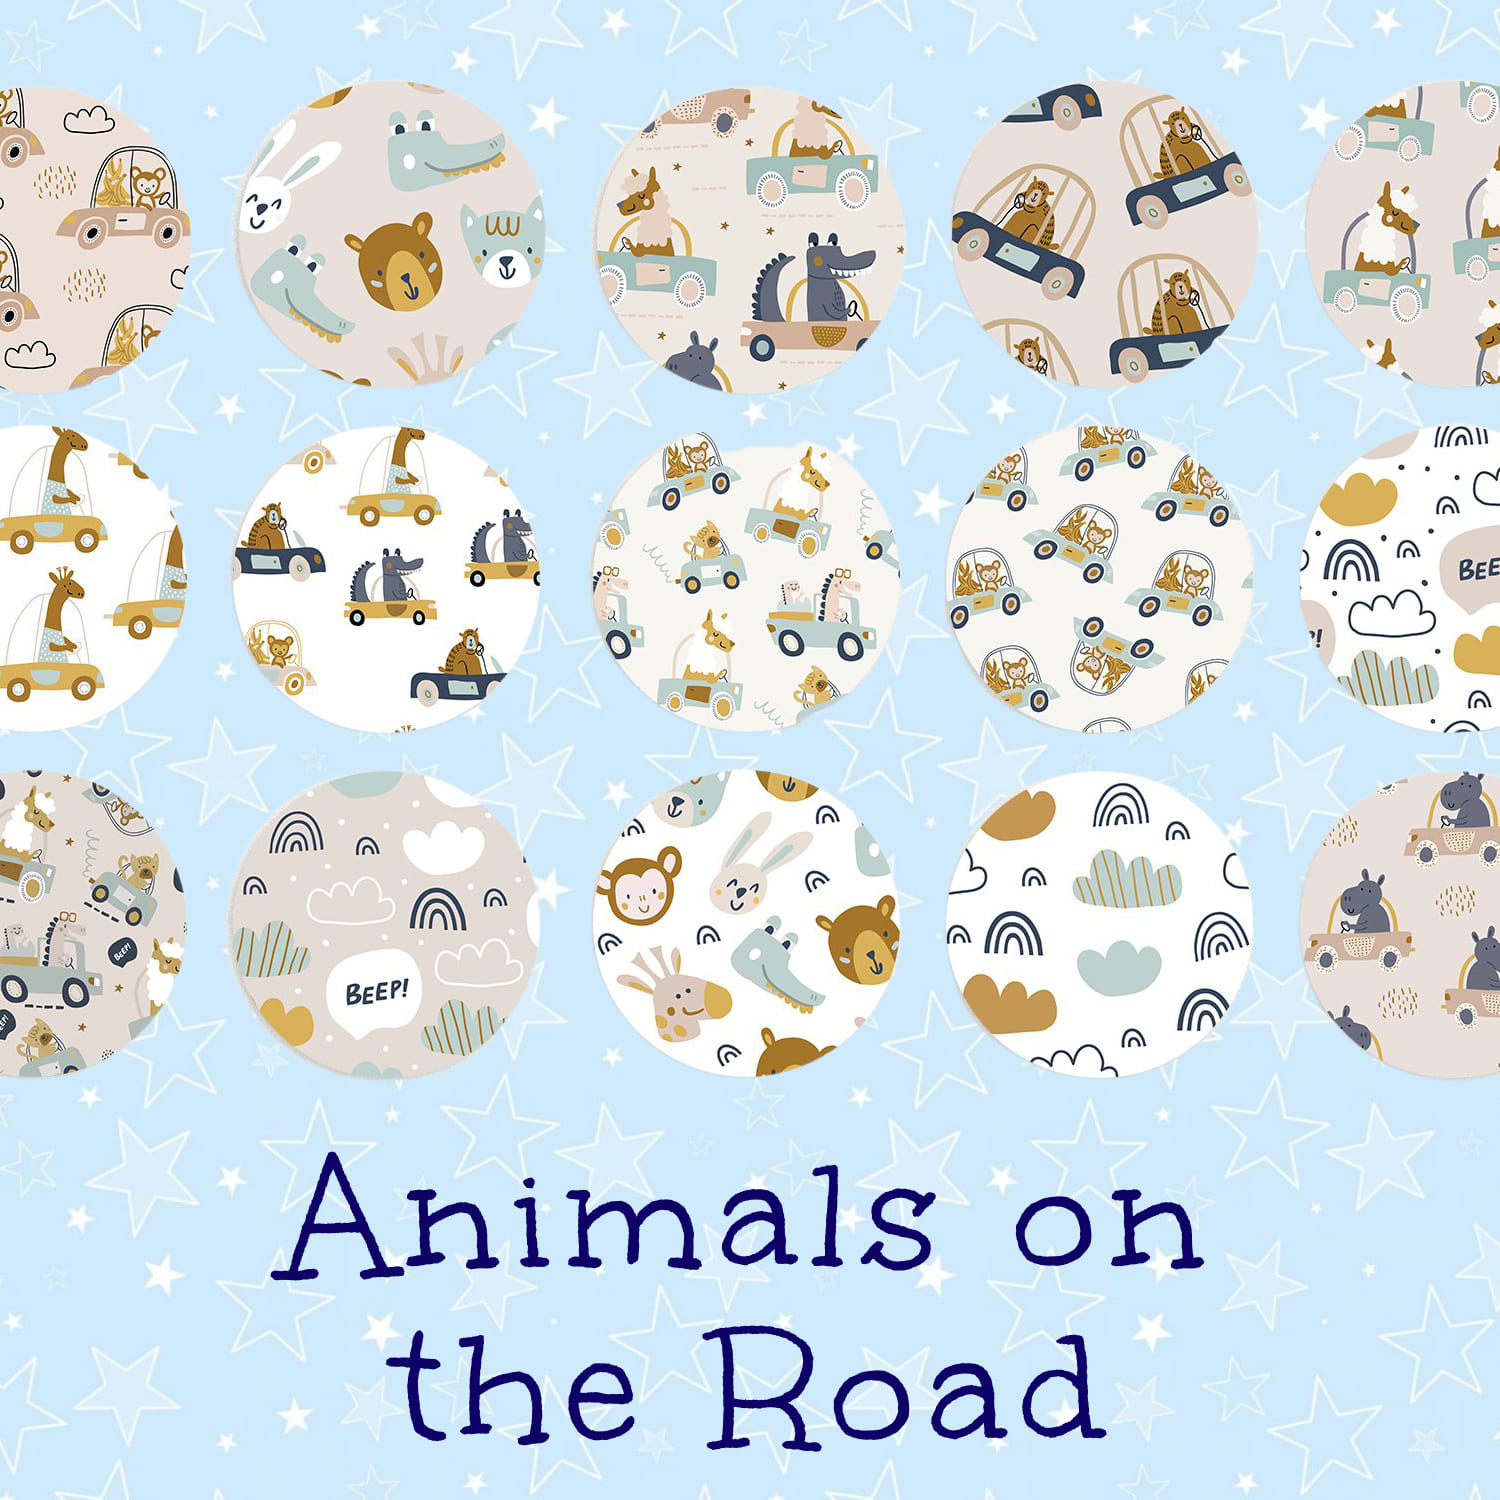 20 Animals on the Road patterns.